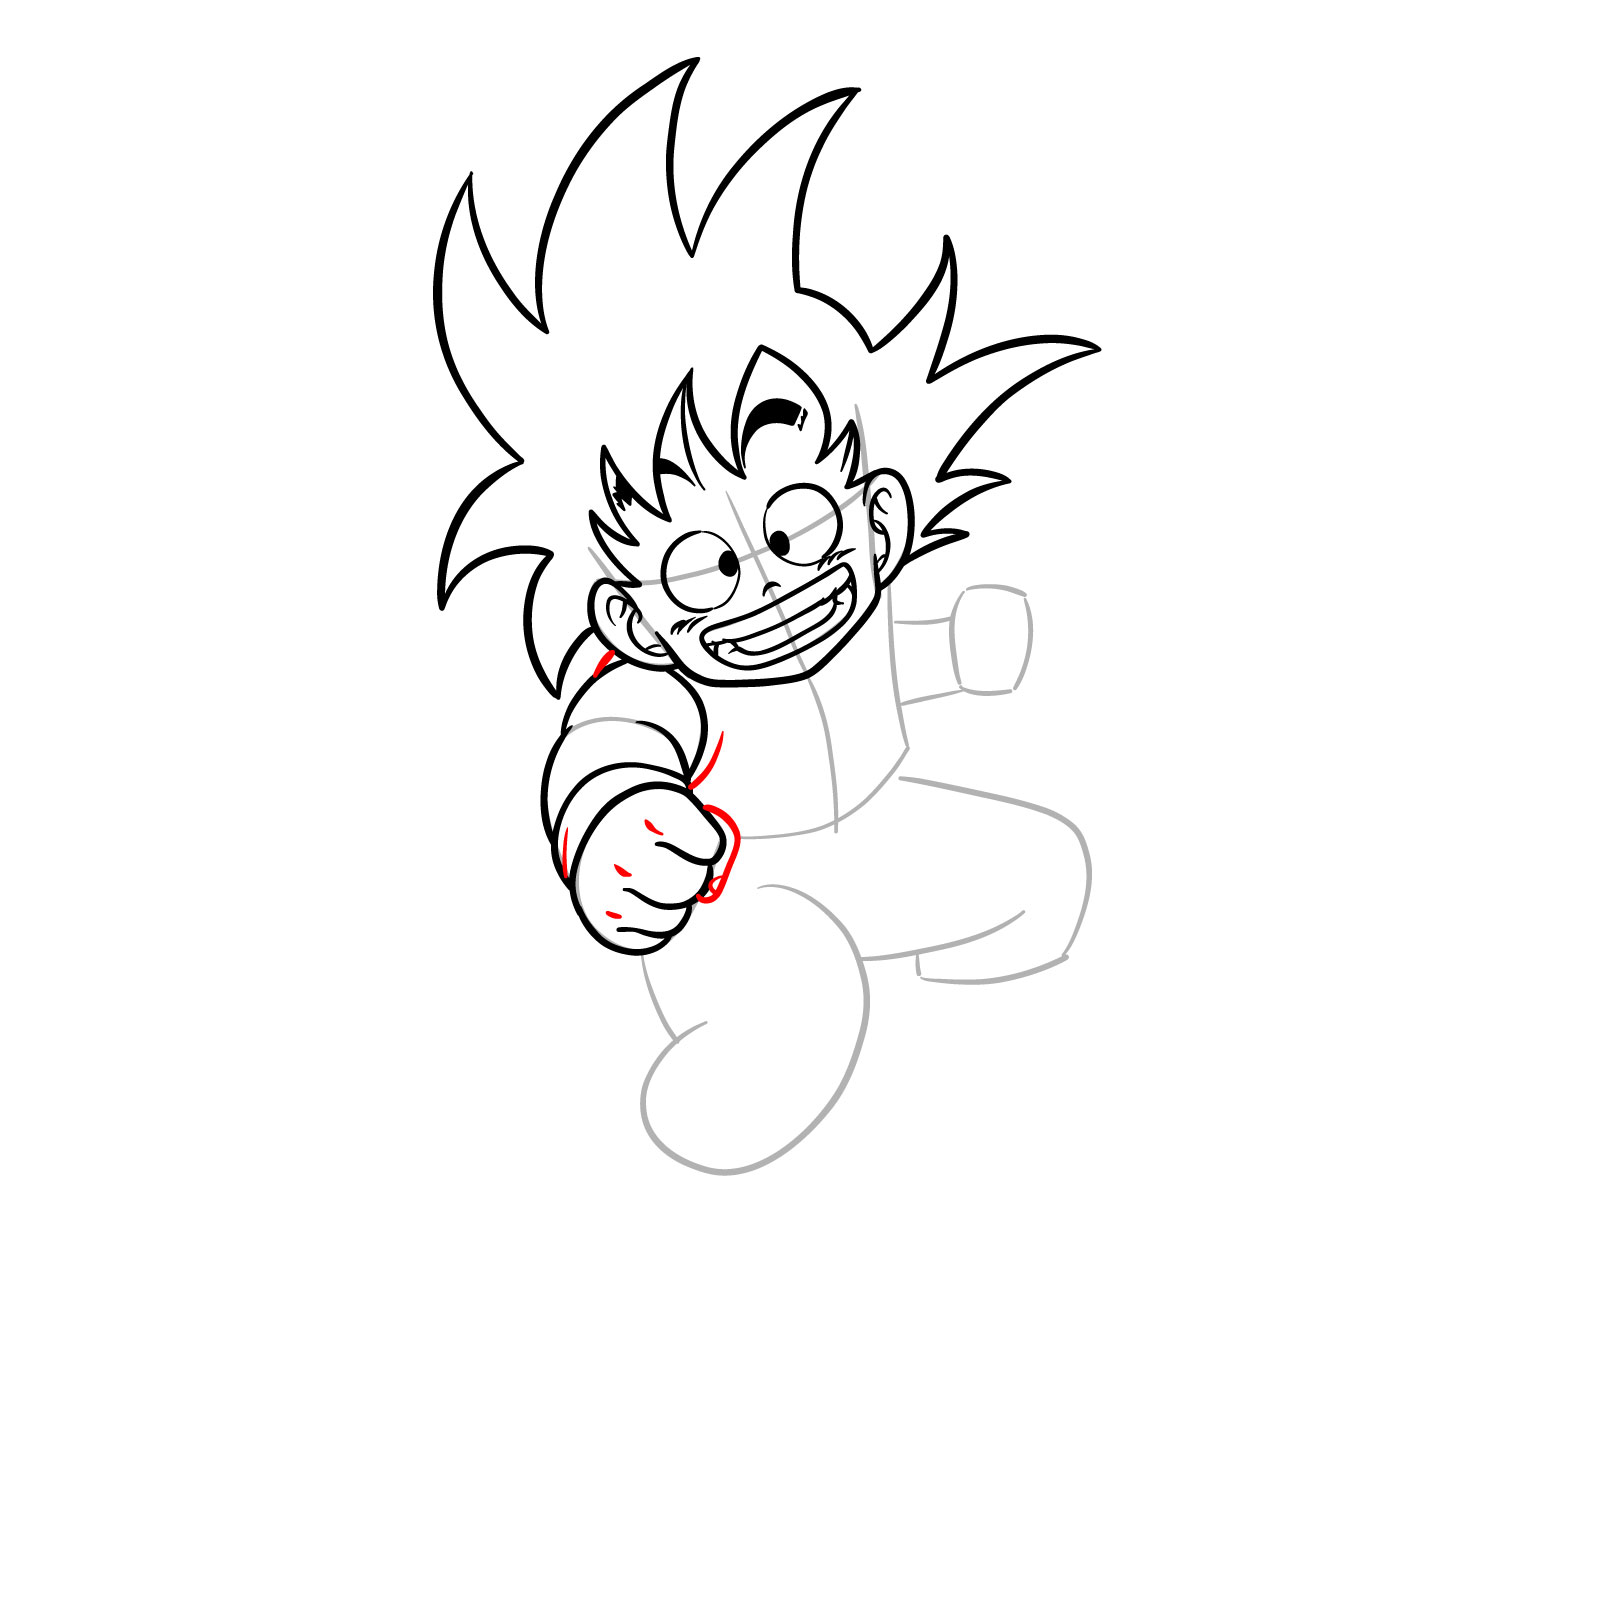 How to draw Kid Goku riding on the Flying Nimbus - step 13